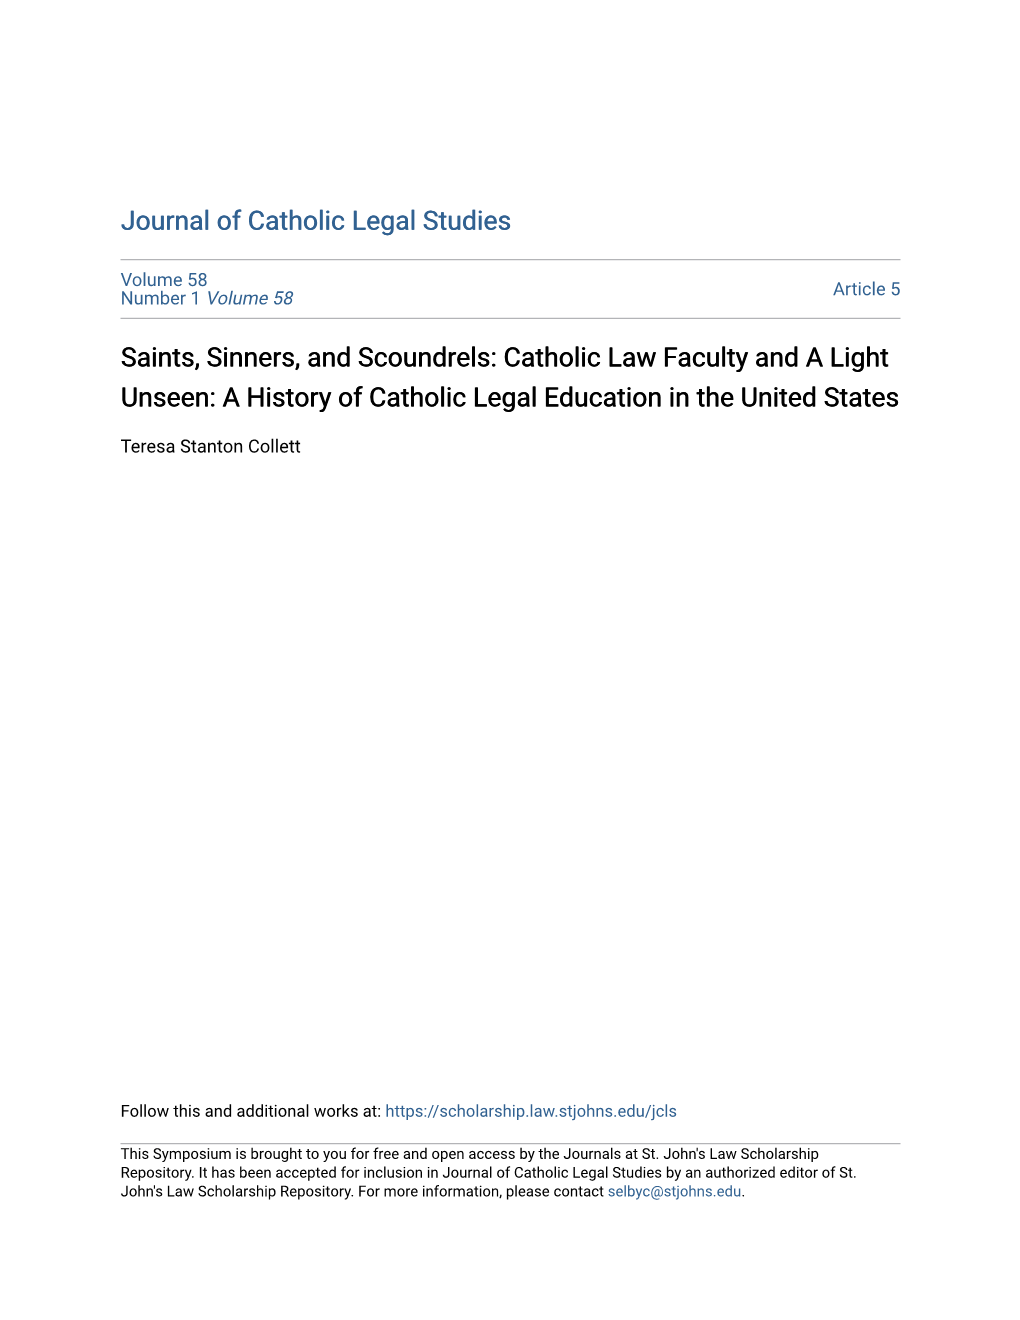 Saints, Sinners, and Scoundrels: Catholic Law Faculty and a Light Unseen: a History of Catholic Legal Education in the United States